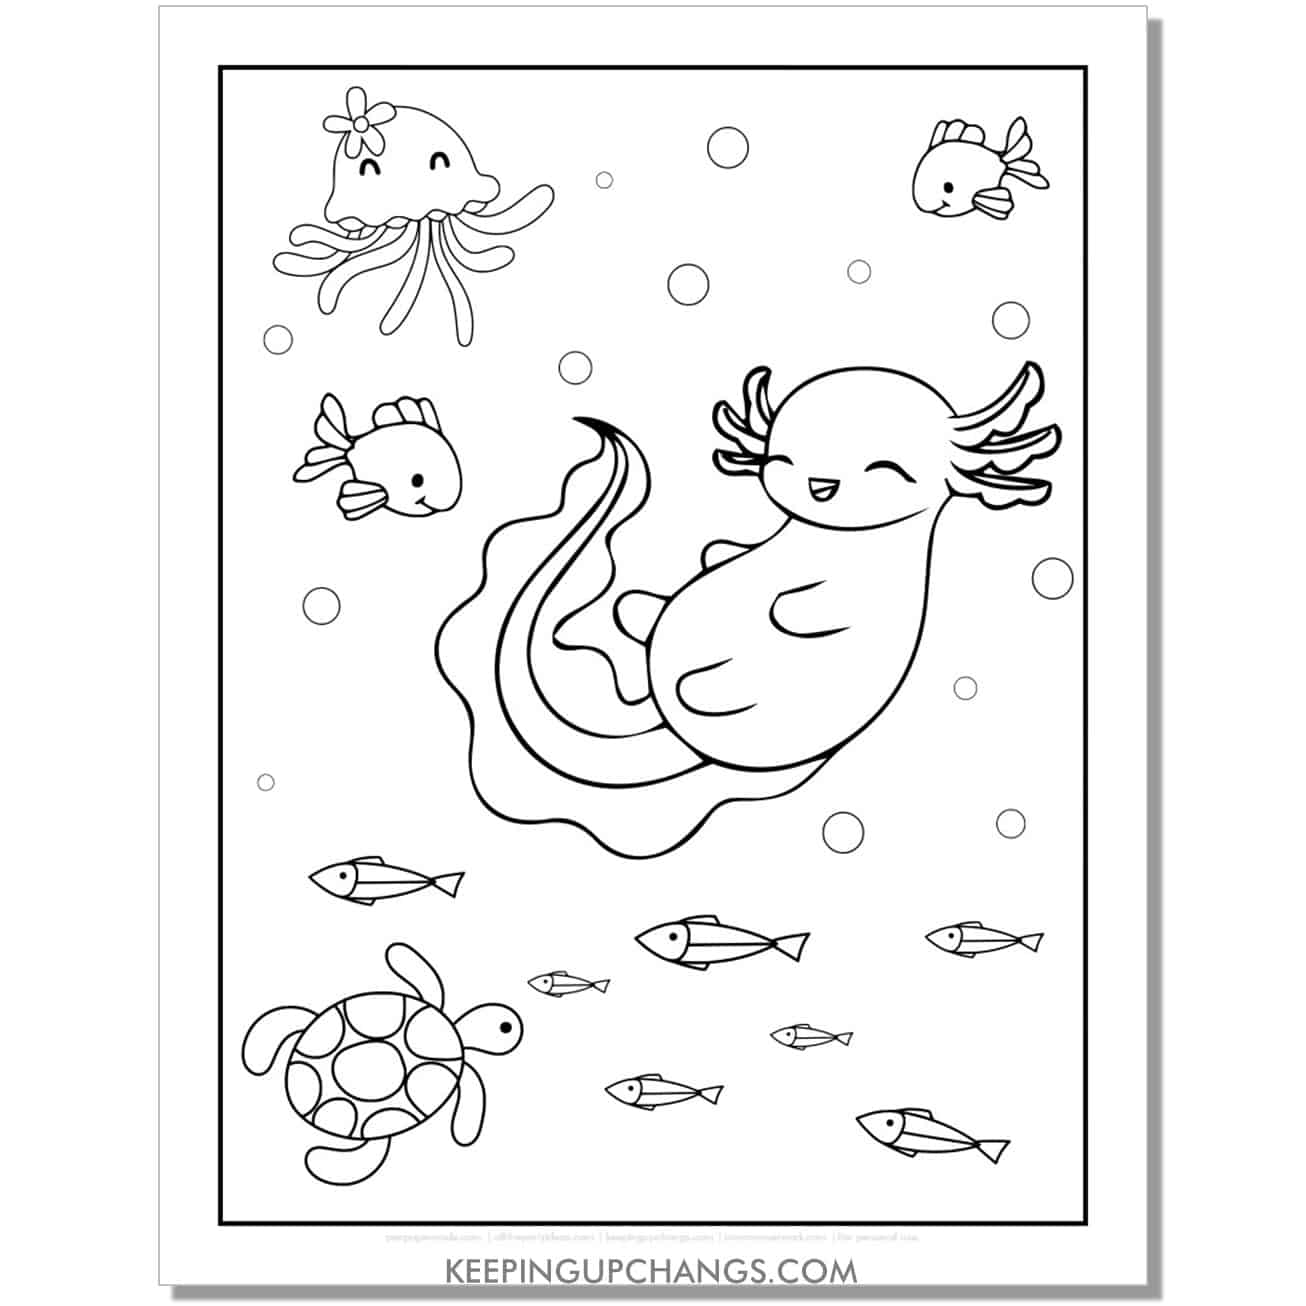 free floating axolotl coloring page with jellyfish, turtle, fish.